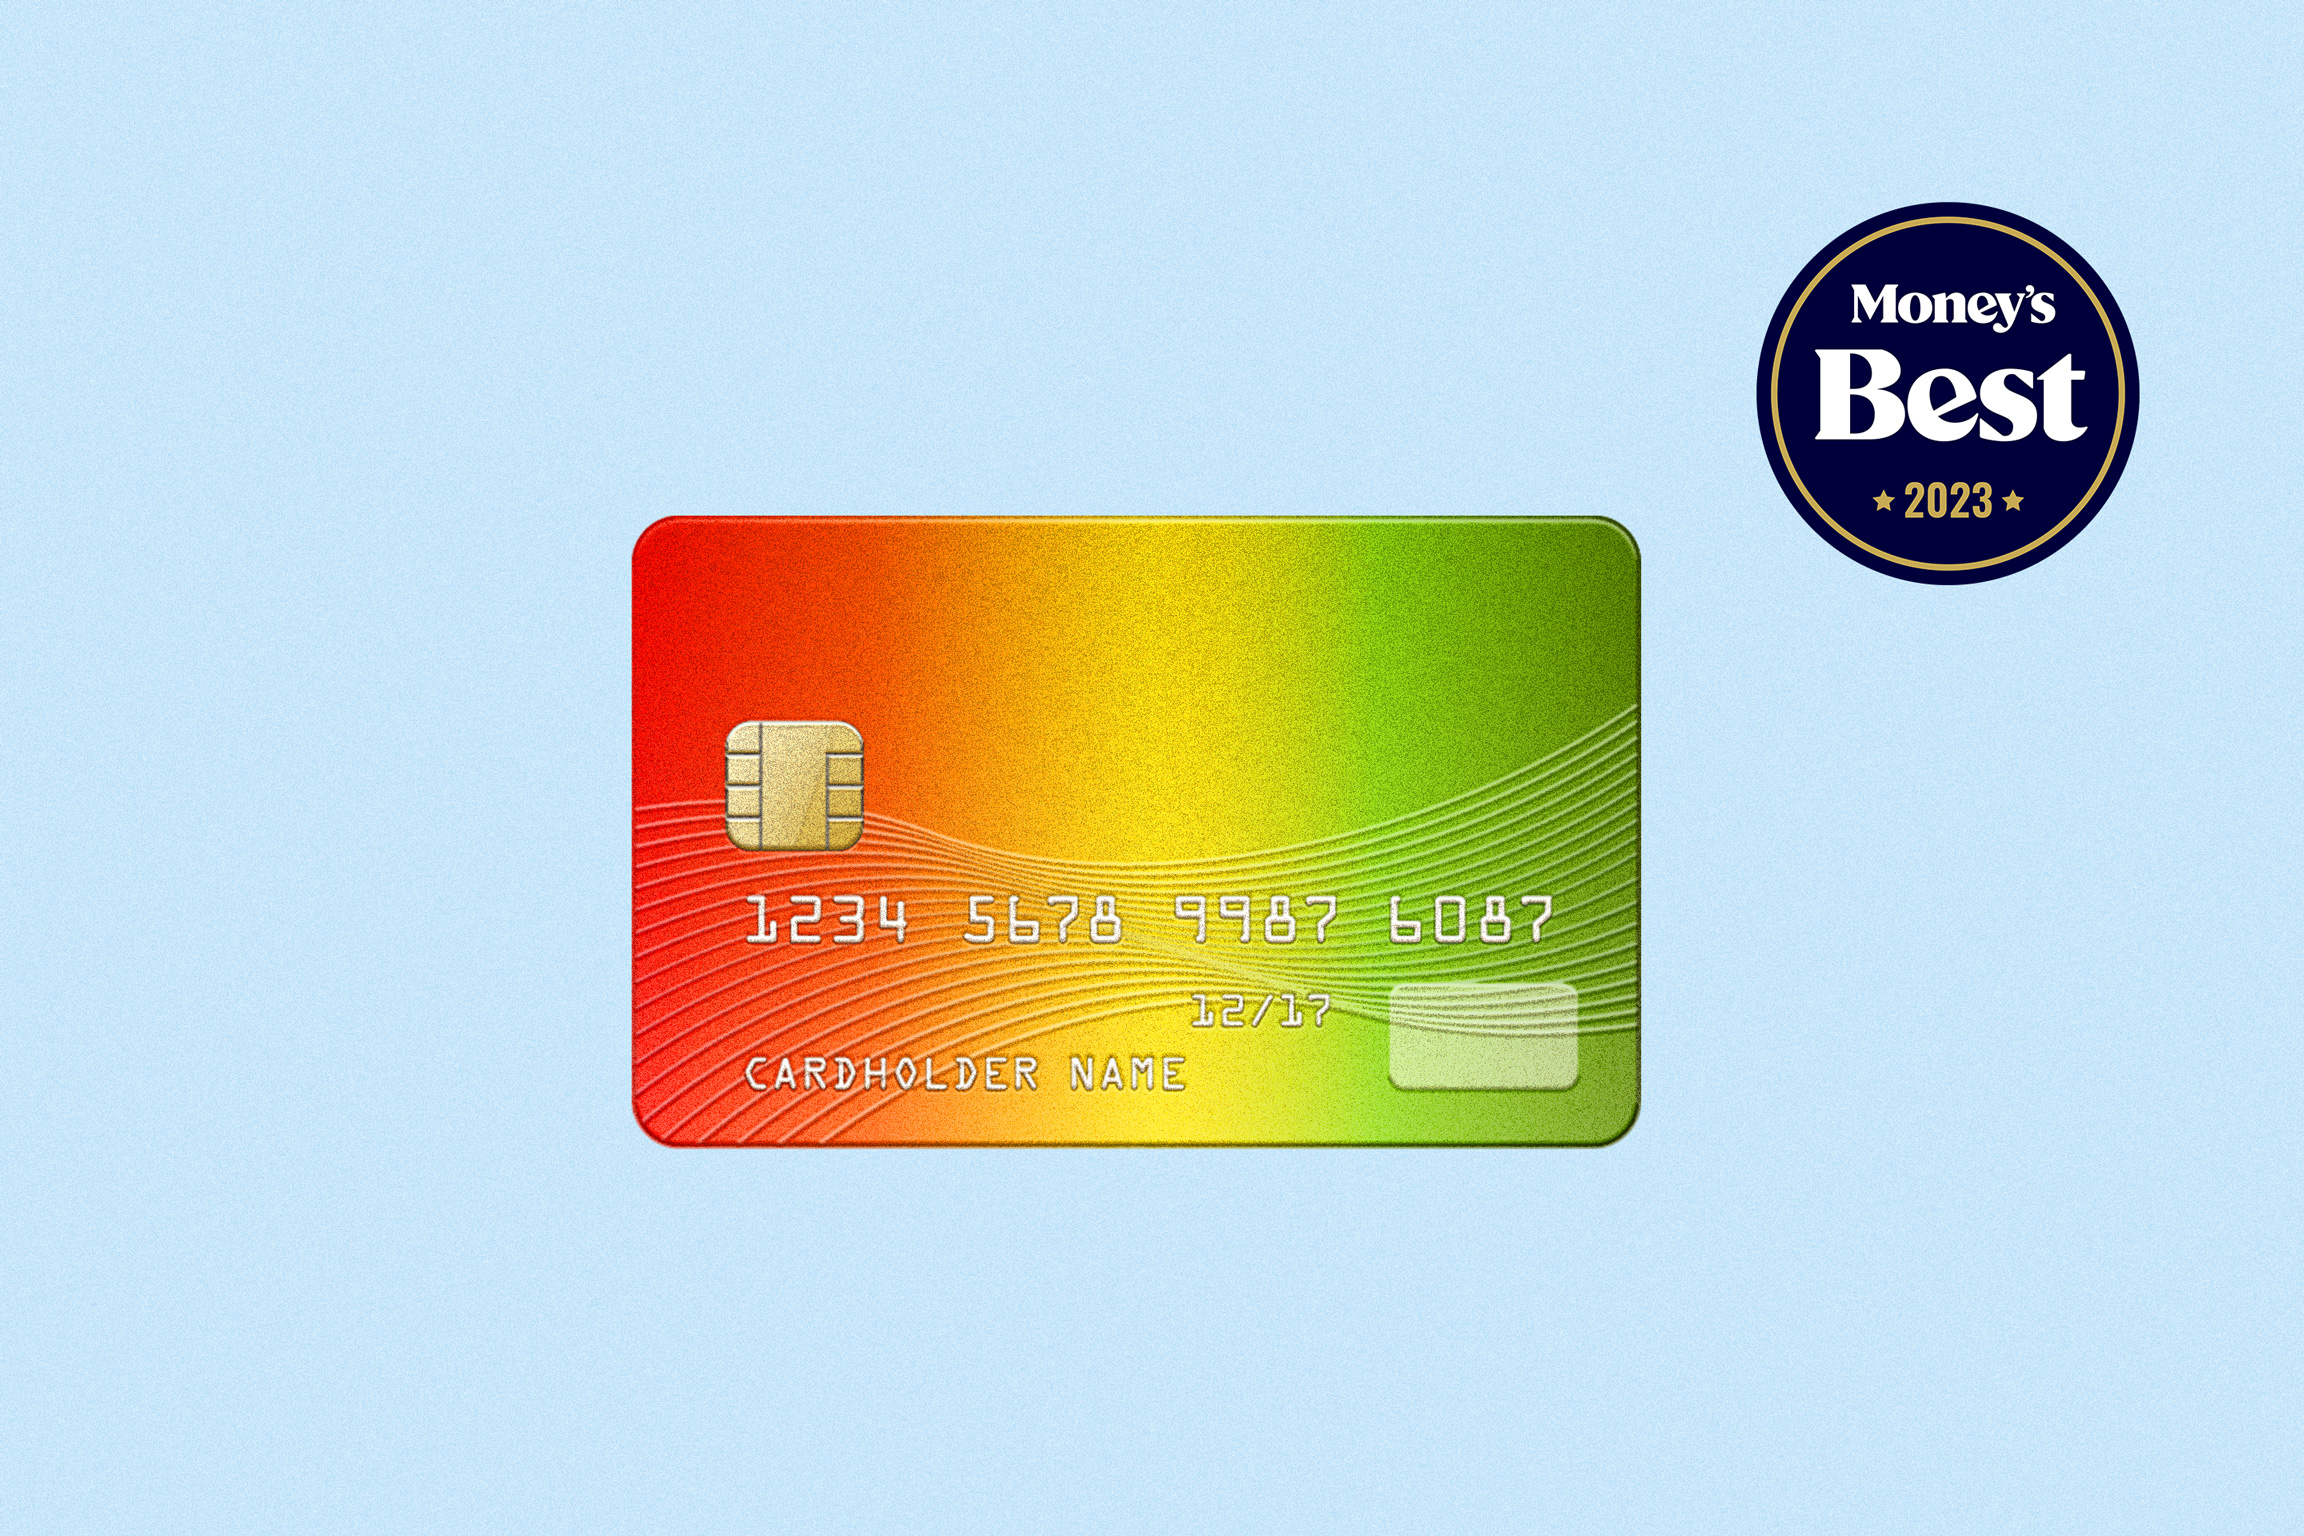 7 Best Credit Cards To Build Credit in 2023